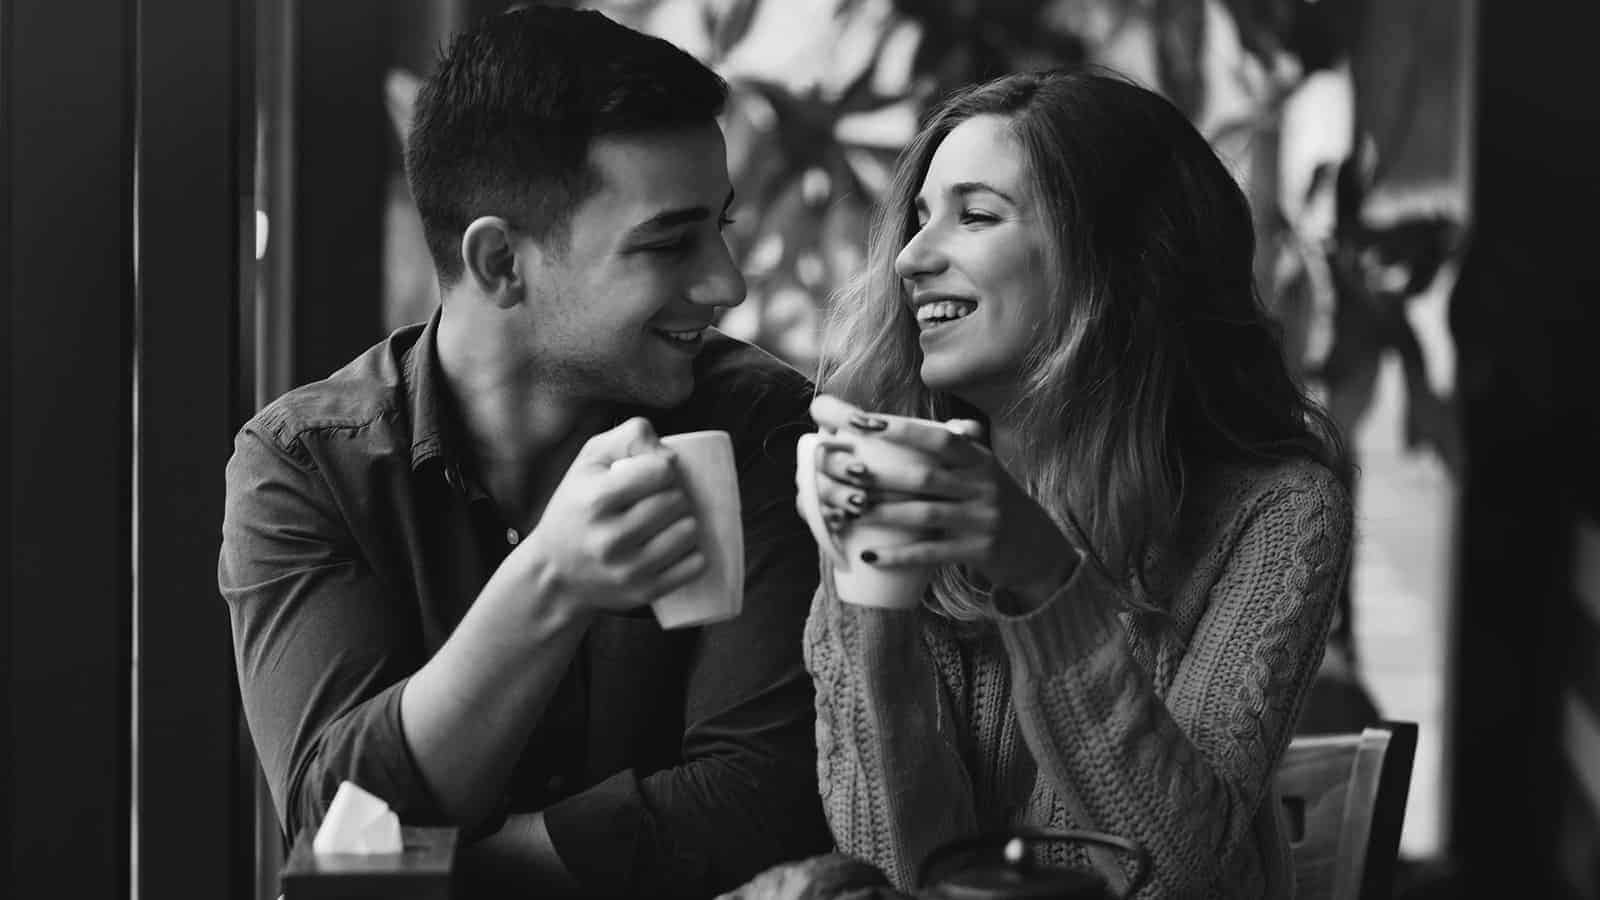 10 Things That Make a Relationship Better (That Couples Often Ignore)